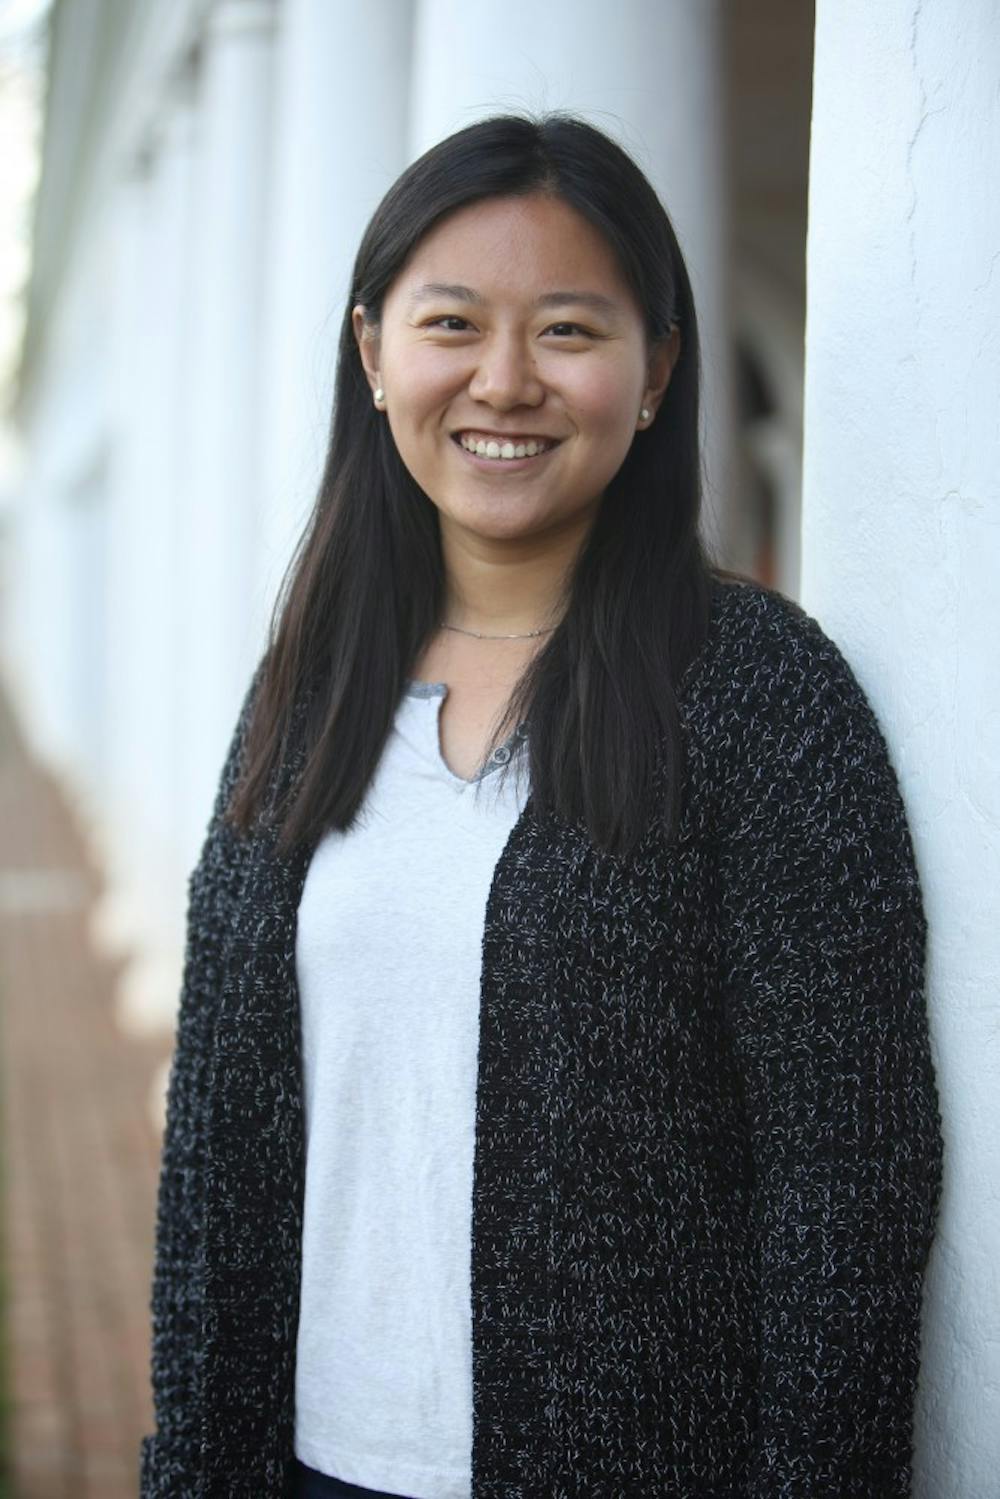 Daisy Xu was a Summer reporter and a News writer for the 127th term of The Cavalier Daily.